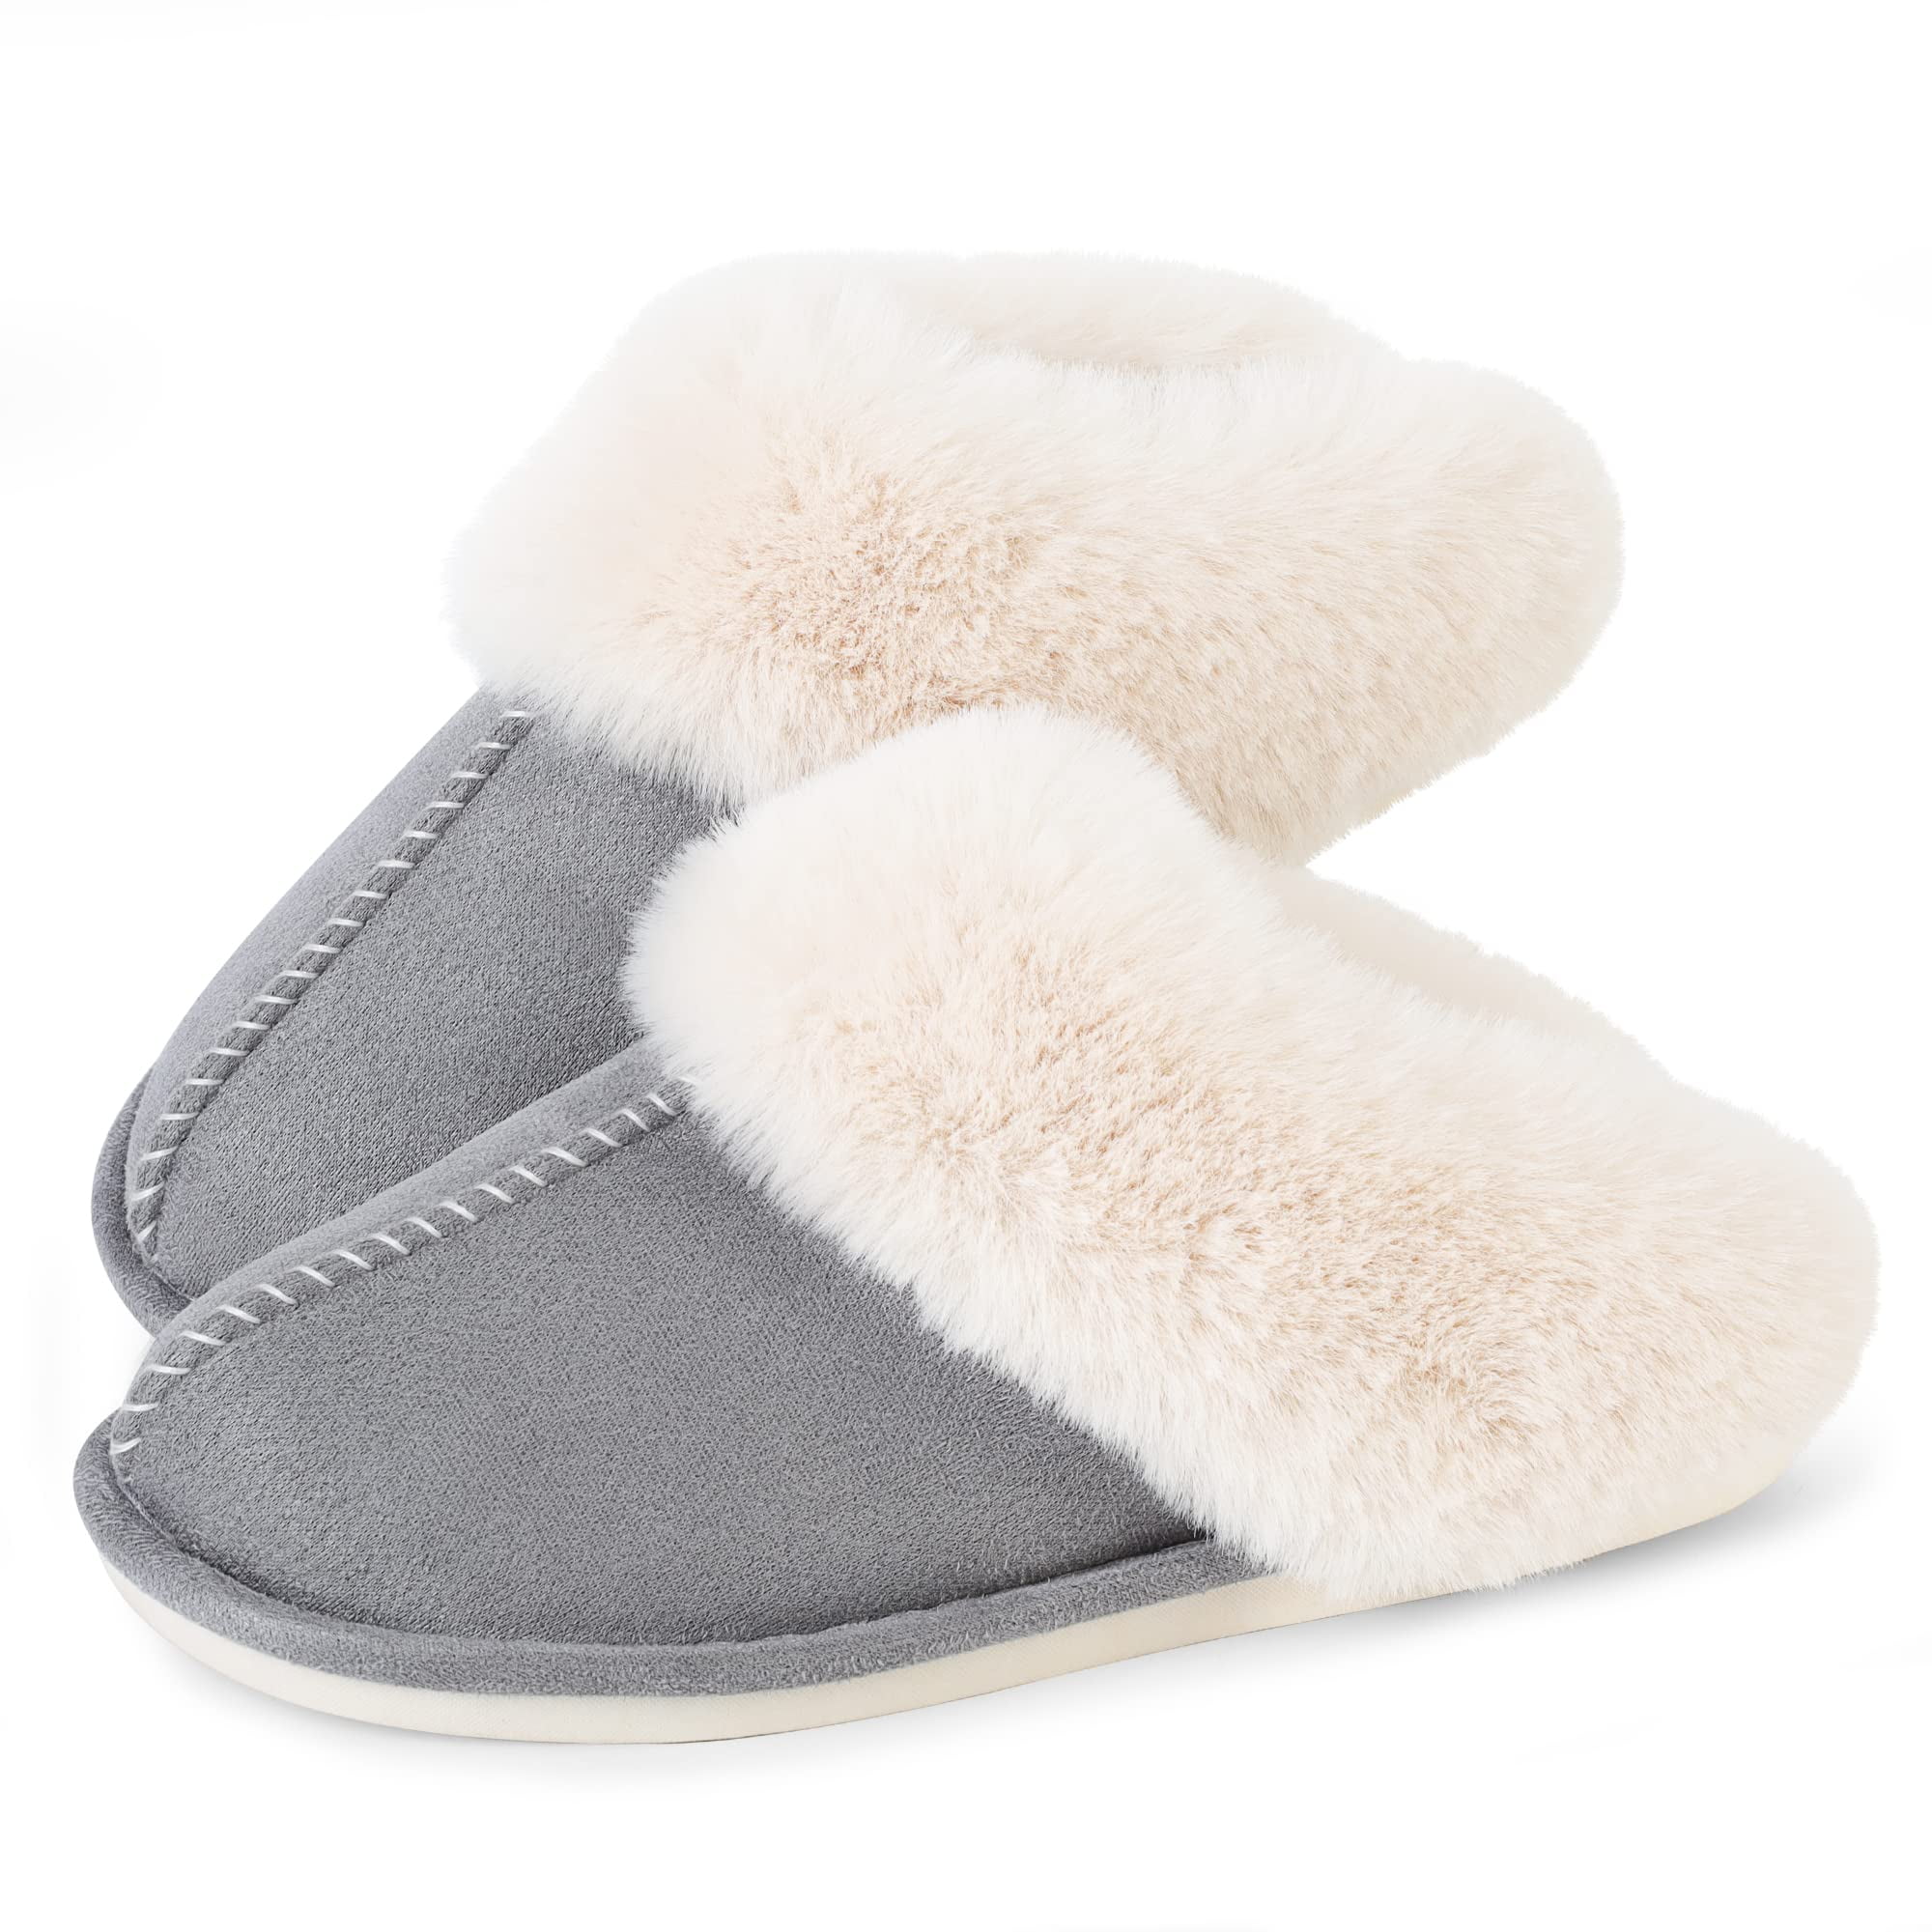 Womens Slippers Cozy Warm Winter Slip On House Shoes Fluffy Soft Memory  Foam Comfy Faux Fur Plush Anti-Skid Indoor/Outdoor